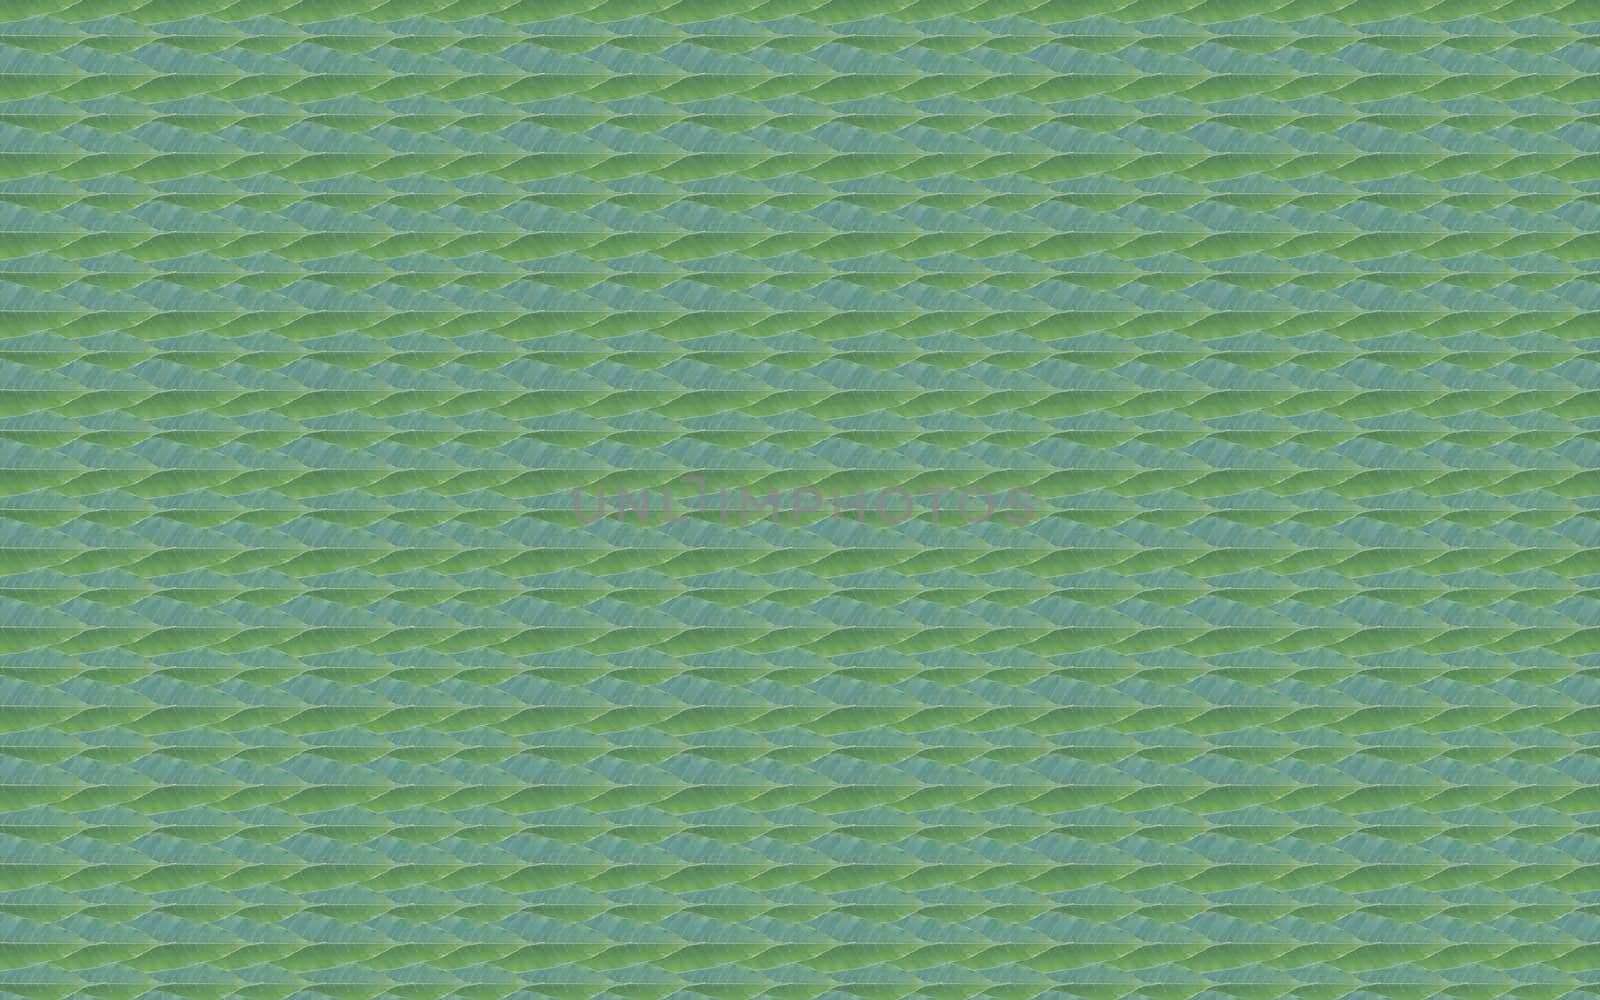 background made of fresh green leaf pattern by a3701027